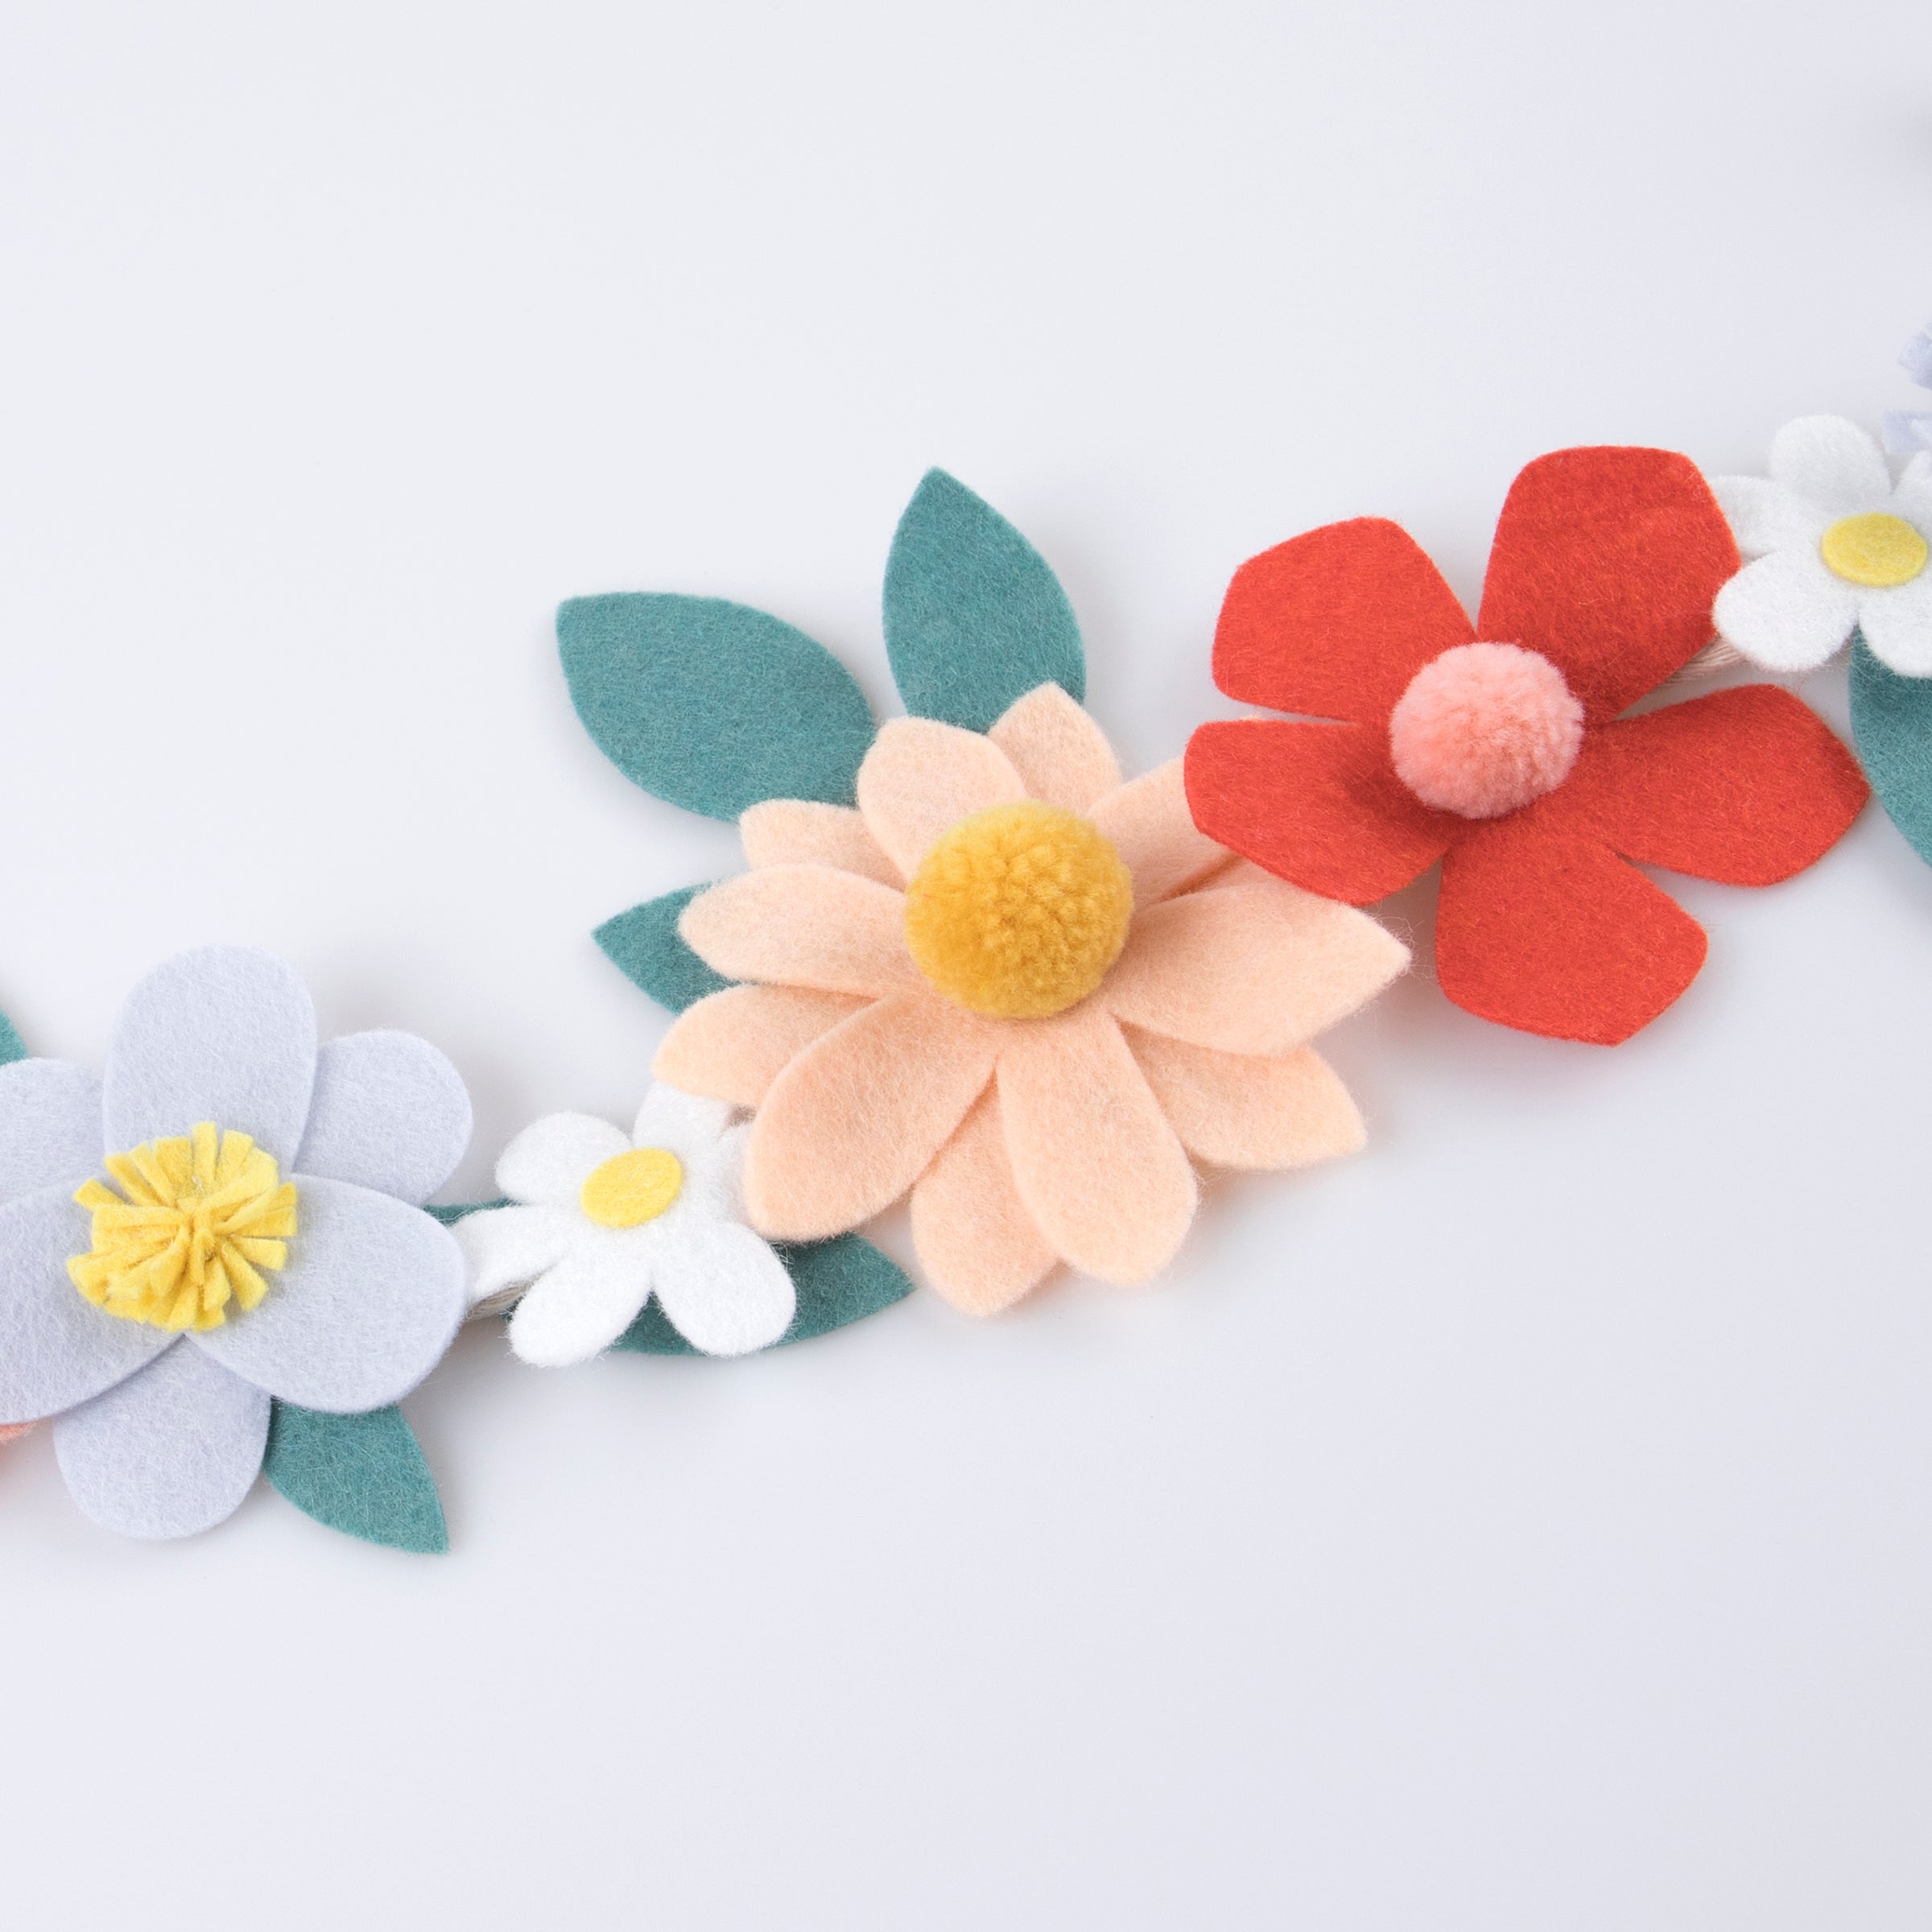 Our special party garland is crafted from felt, with flowers with pompom centres.